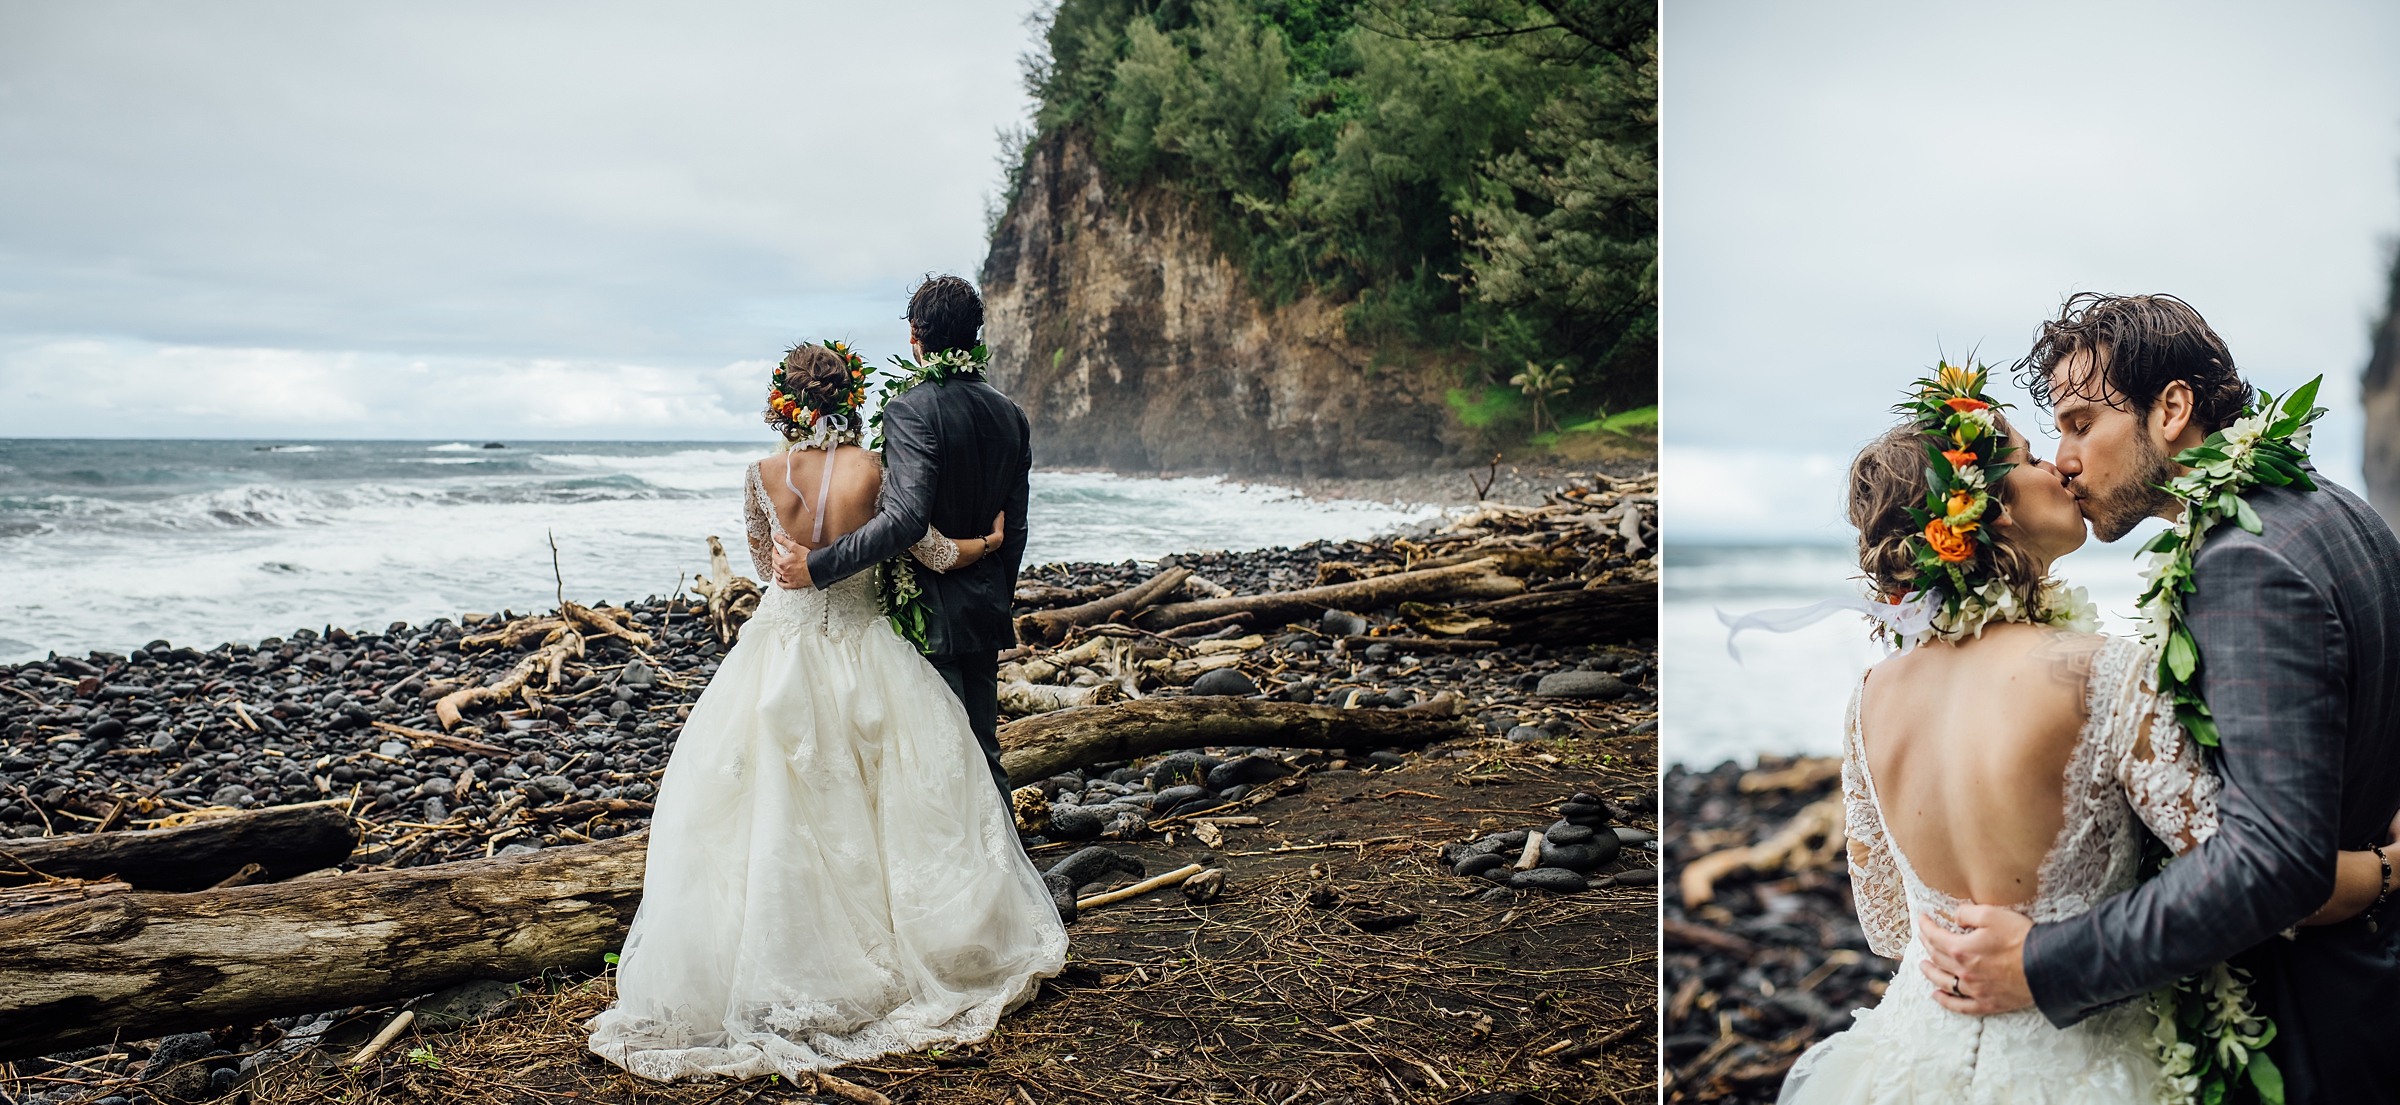 eloping in Hawaii with a magical ocean view